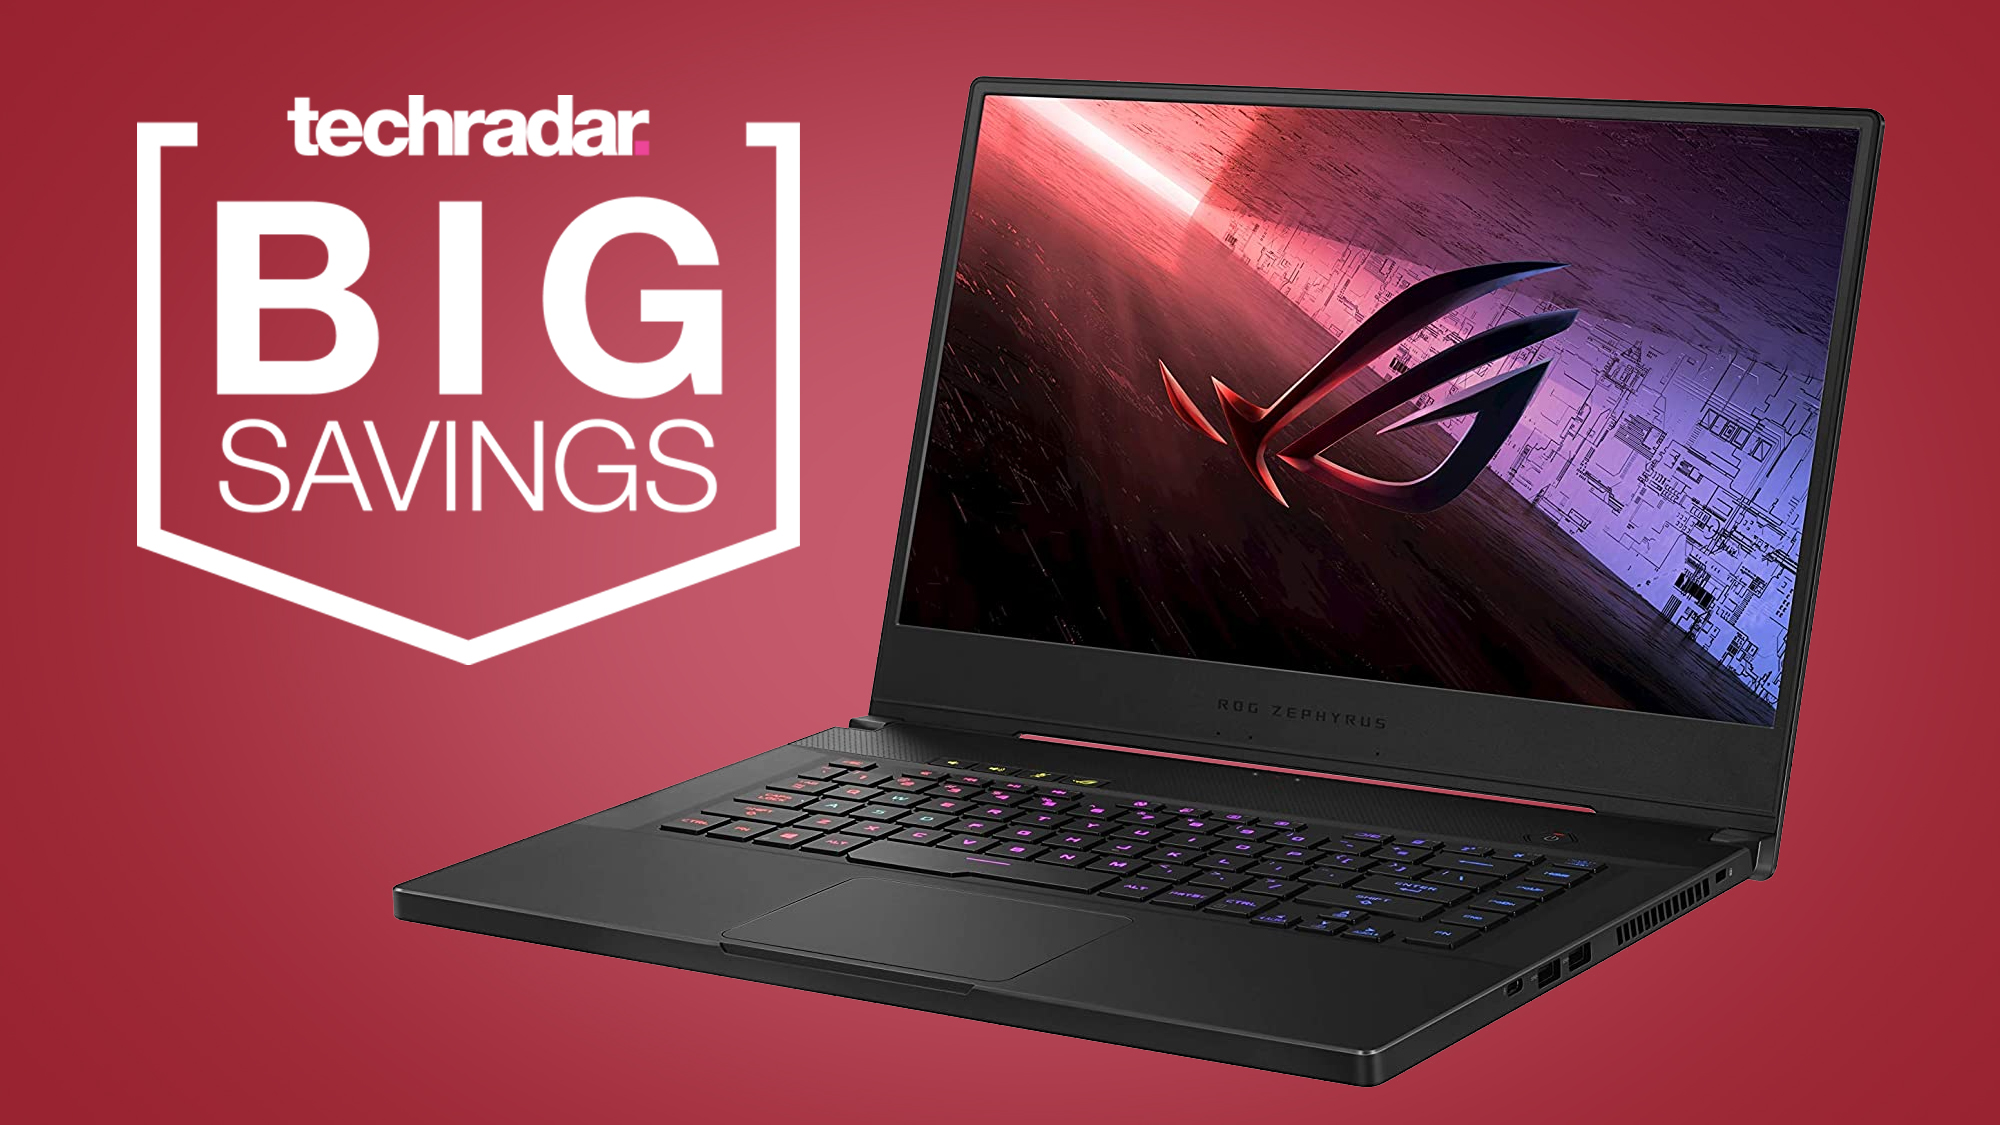 Best gaming laptops deals for Prime Day — save on Asus ROG, MSI